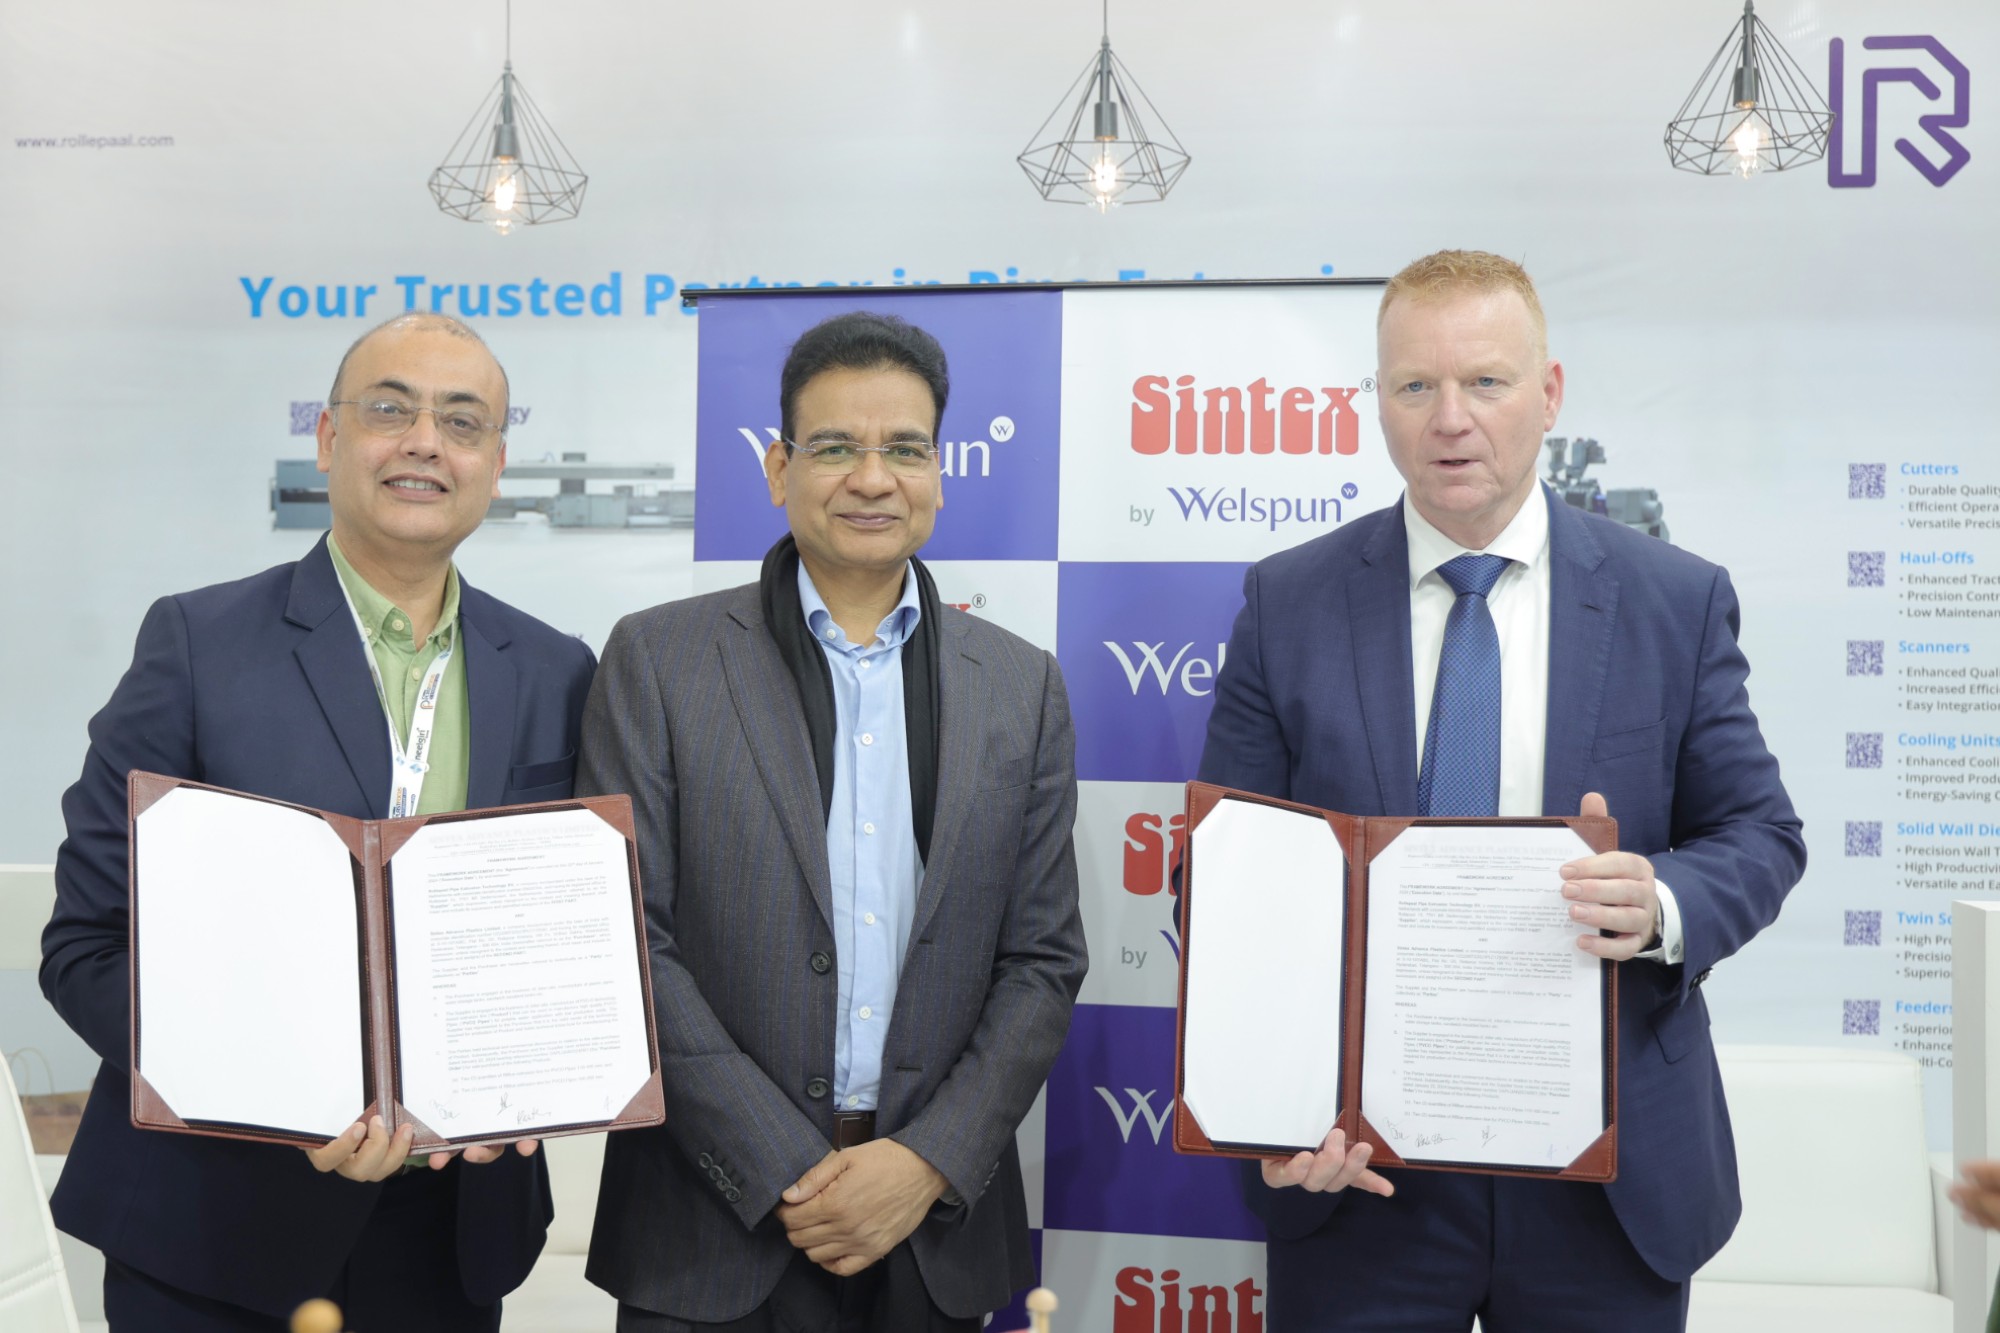 Rollepaal and Sintex collabs for PVCO pipe